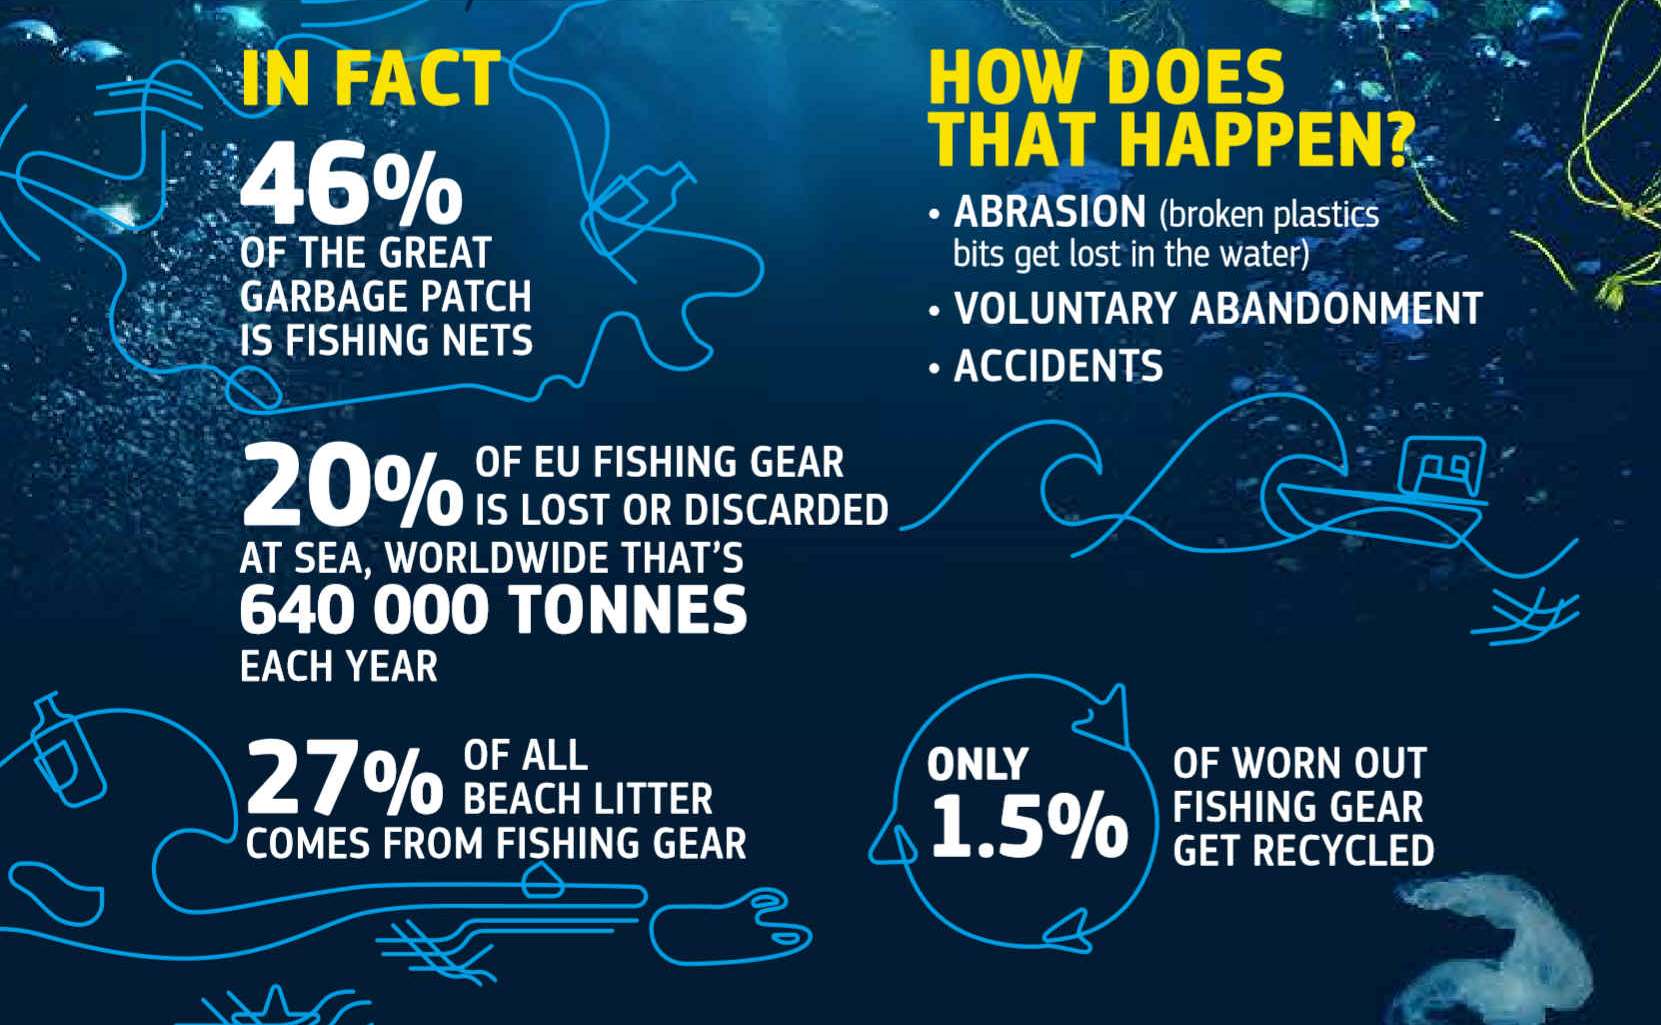 46% of the great garbage patch is fishing nets